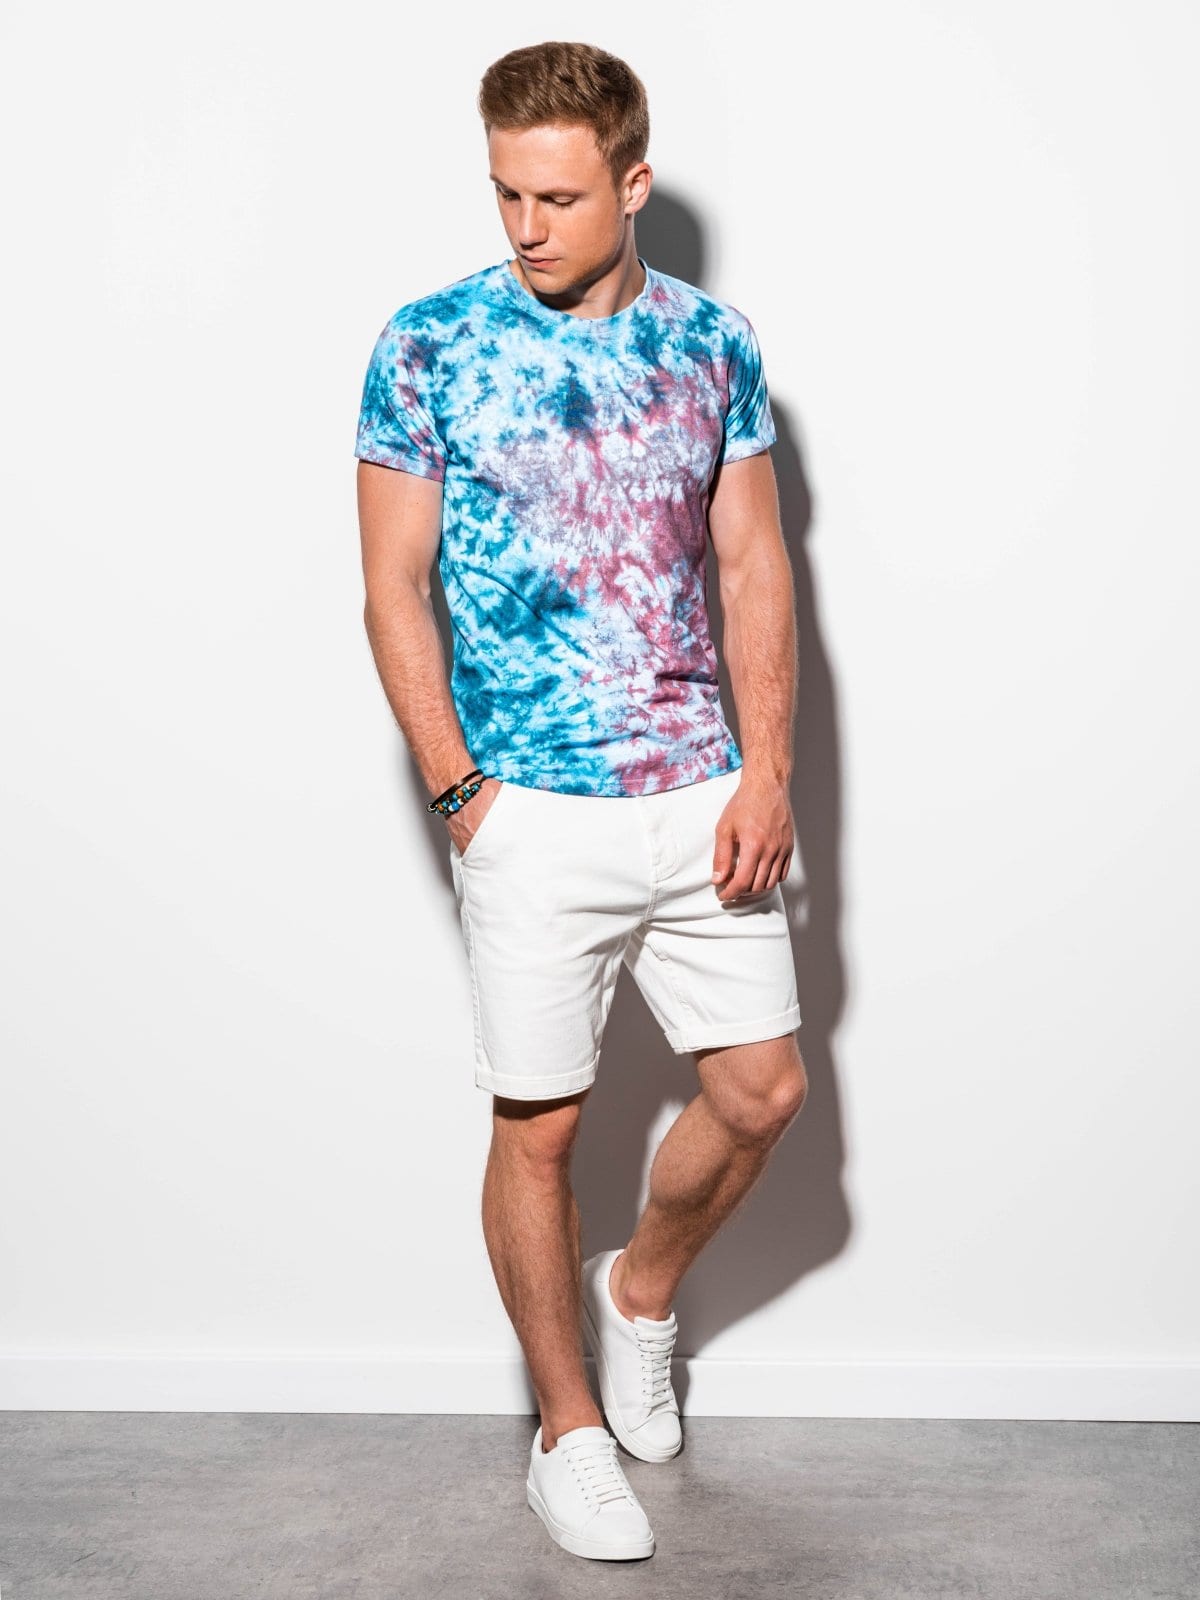 tiedye outfits for men